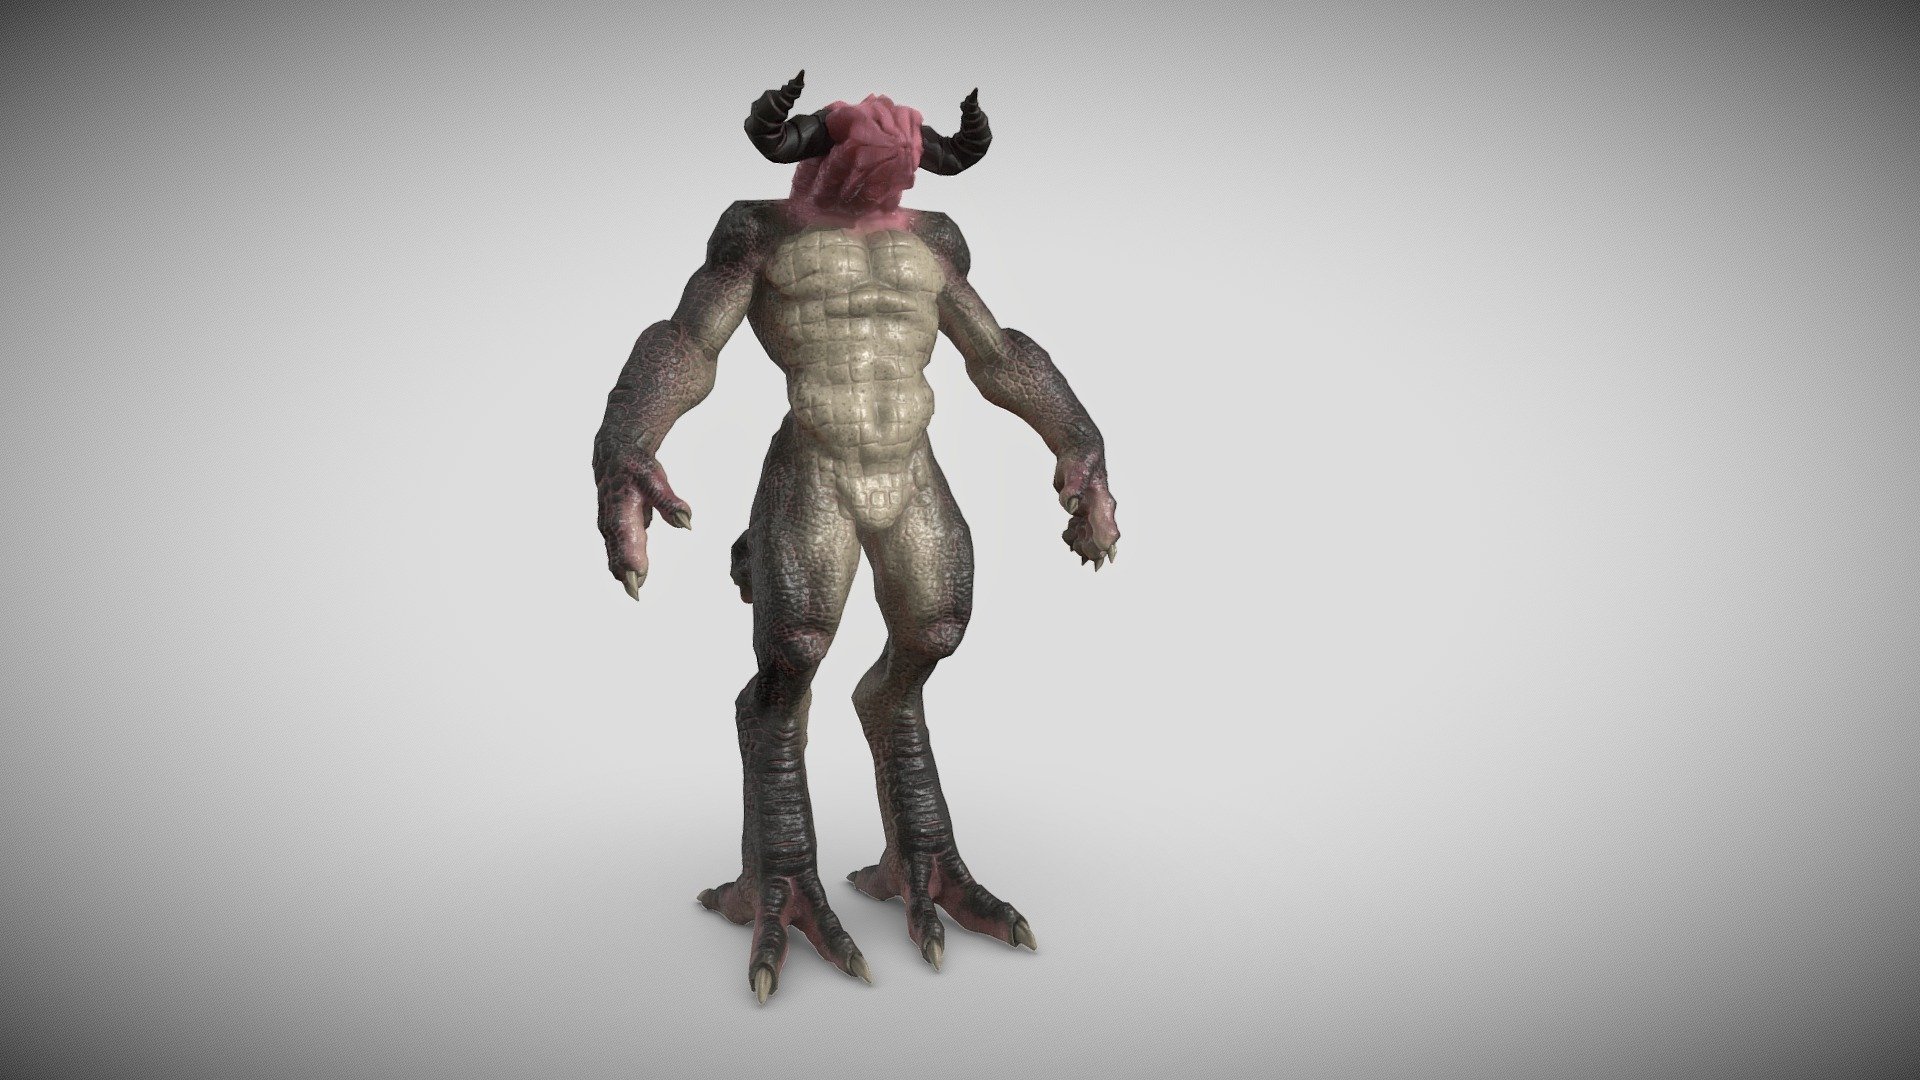 Here's my interpretation of Humbaba the Terrible from the Epic of Gilgamesh. He is a fully rigged game-res asset. 
Since he is a public domain character, you can feel free to use him in whatever project you wish. You just have to credit me with a link to my sketchfab or artstation. I will note that the anim rig currently is for Blender only.

Here is also the link to the rig tools addon required to use the rig: https://mega.nz/folder/kZ4TSL6a#PbNqhAolUr07Z2jUhdg3og/file/xM52TZAZ - Humbaba the Terrible - Buy Royalty Free 3D model by Collin Boudreaux (@frostedtalents140) 3d model